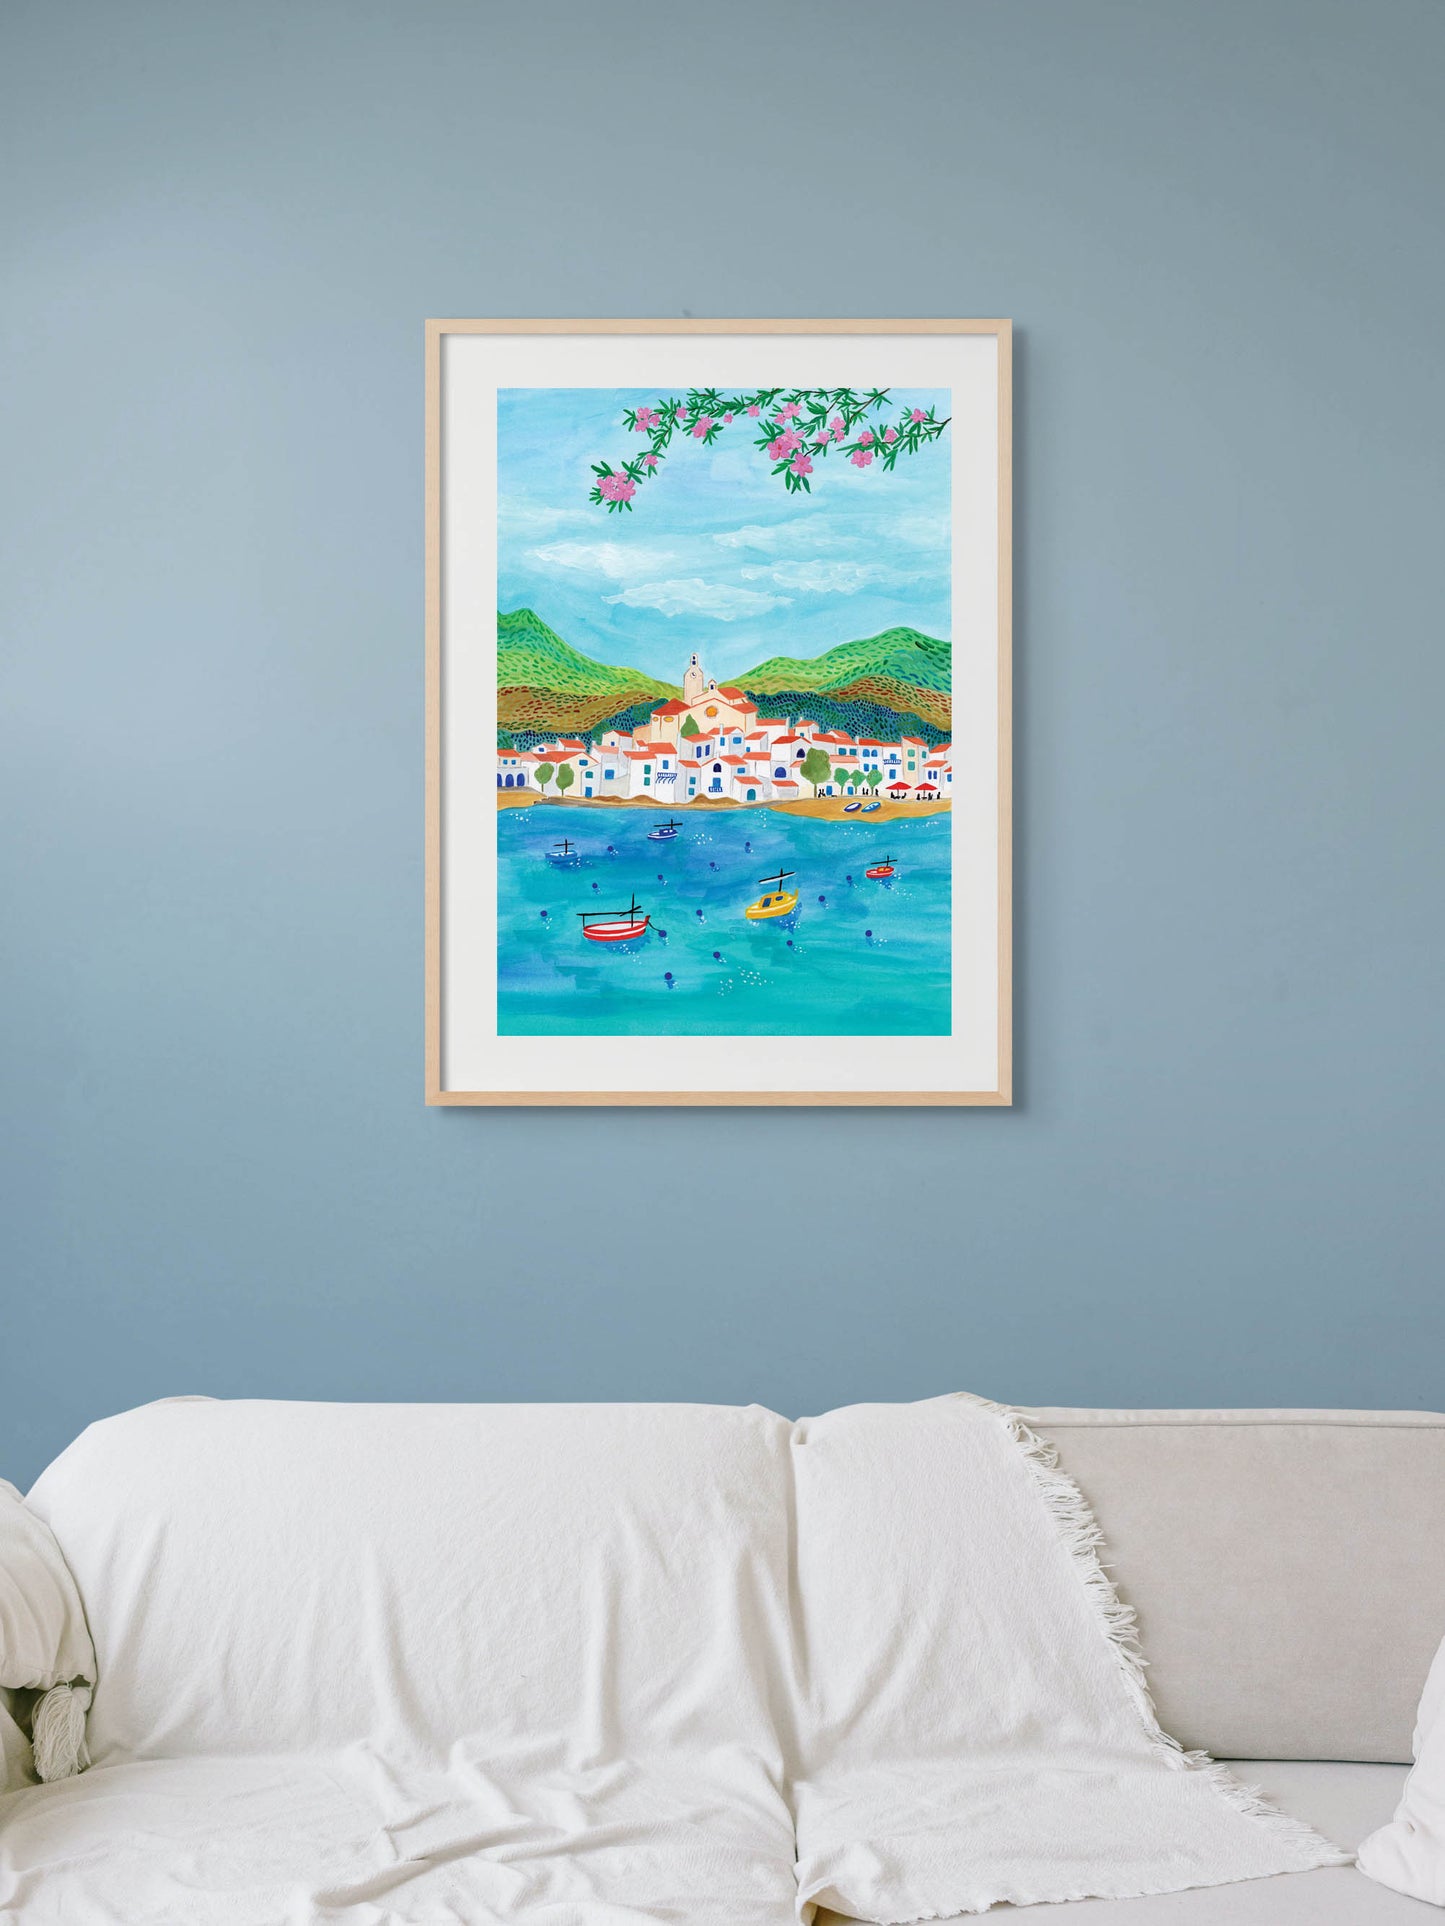 A living room with an art print on the wall of Cadaques, a village in Spain